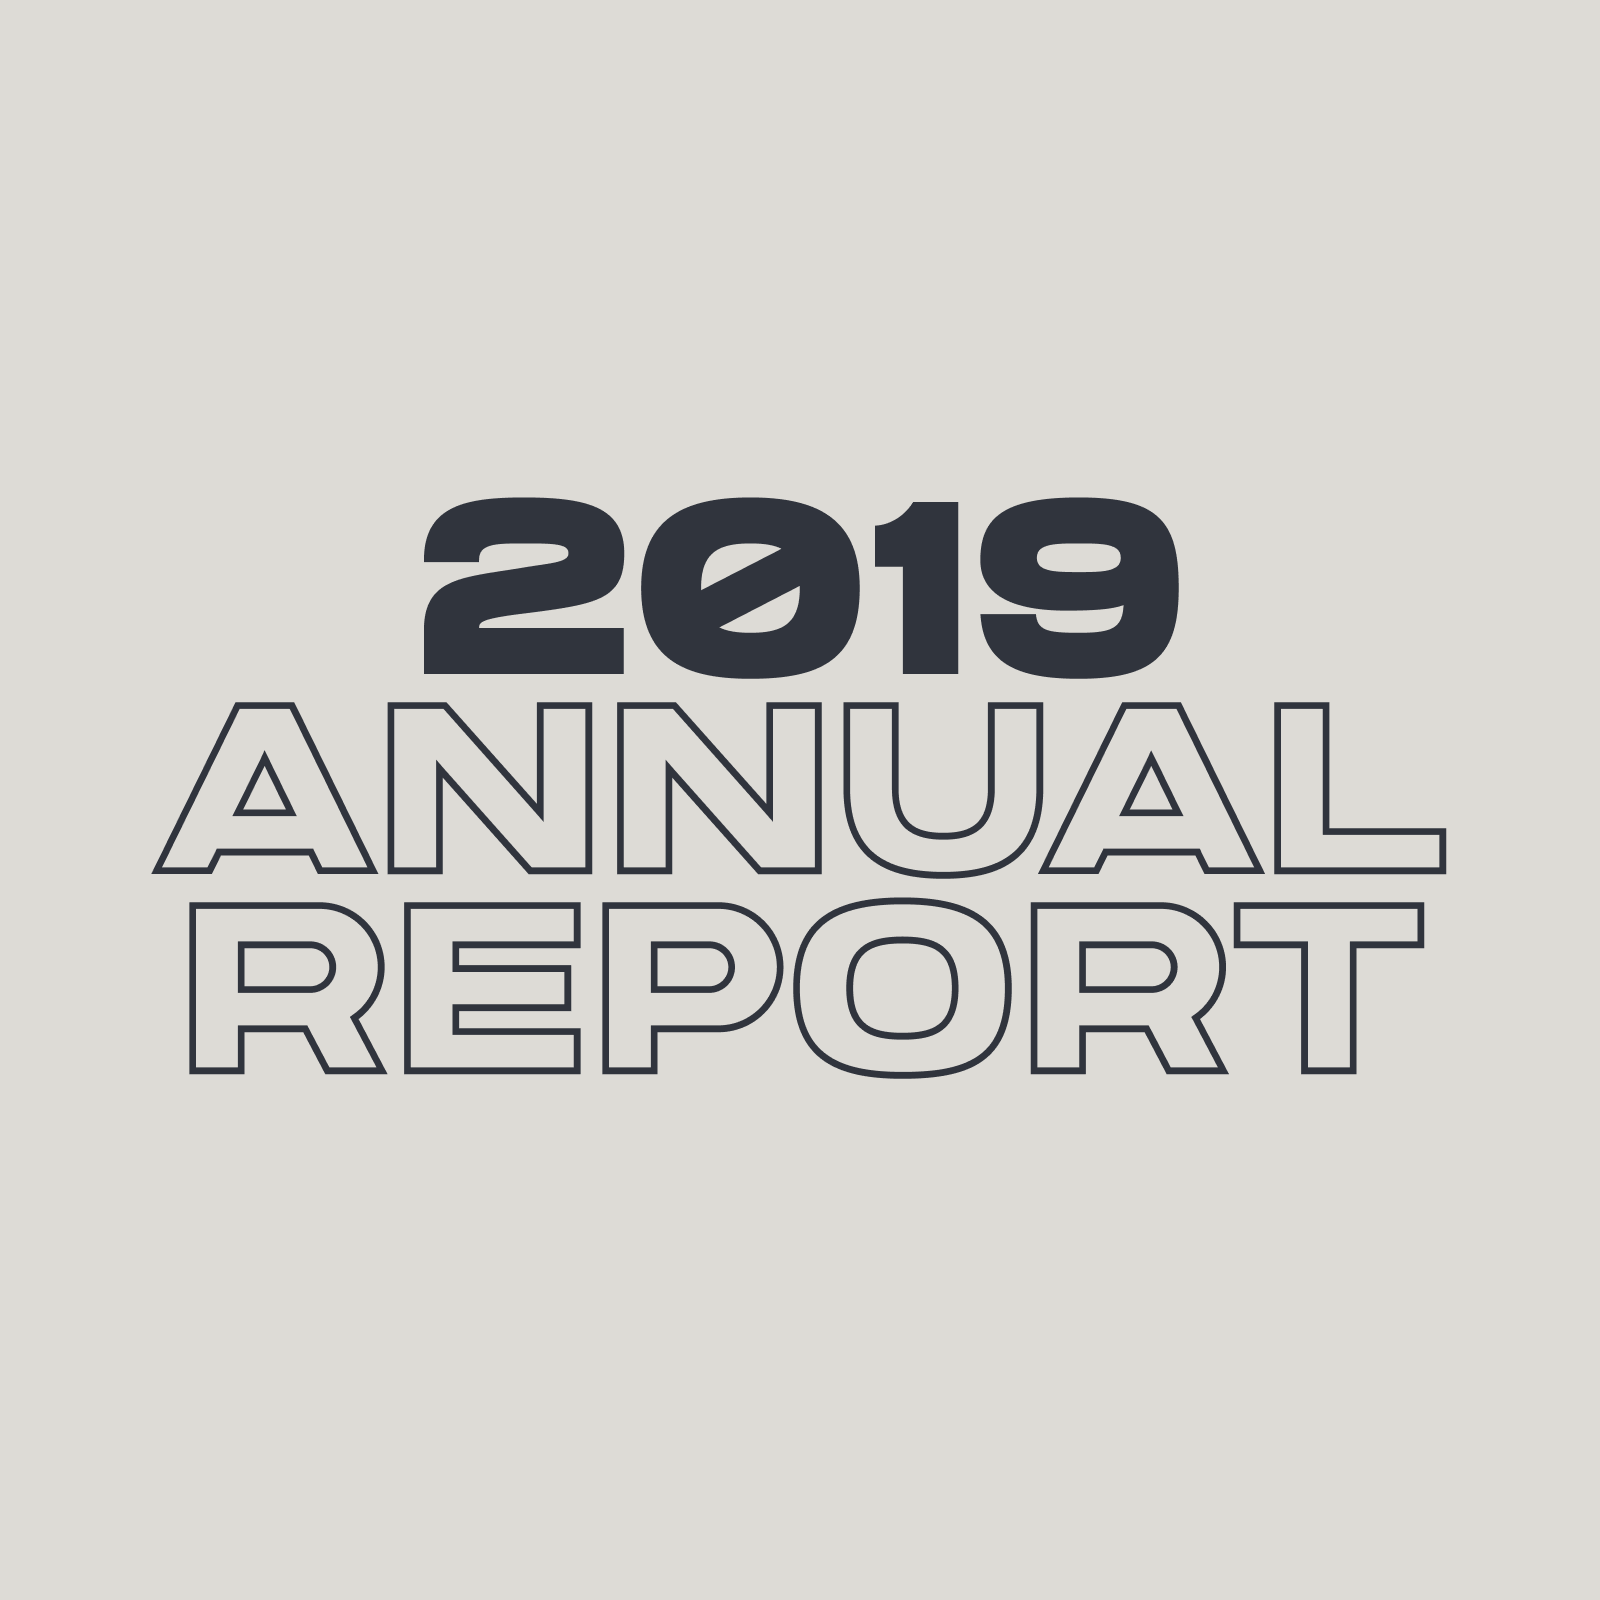 2019 Annual Report.png